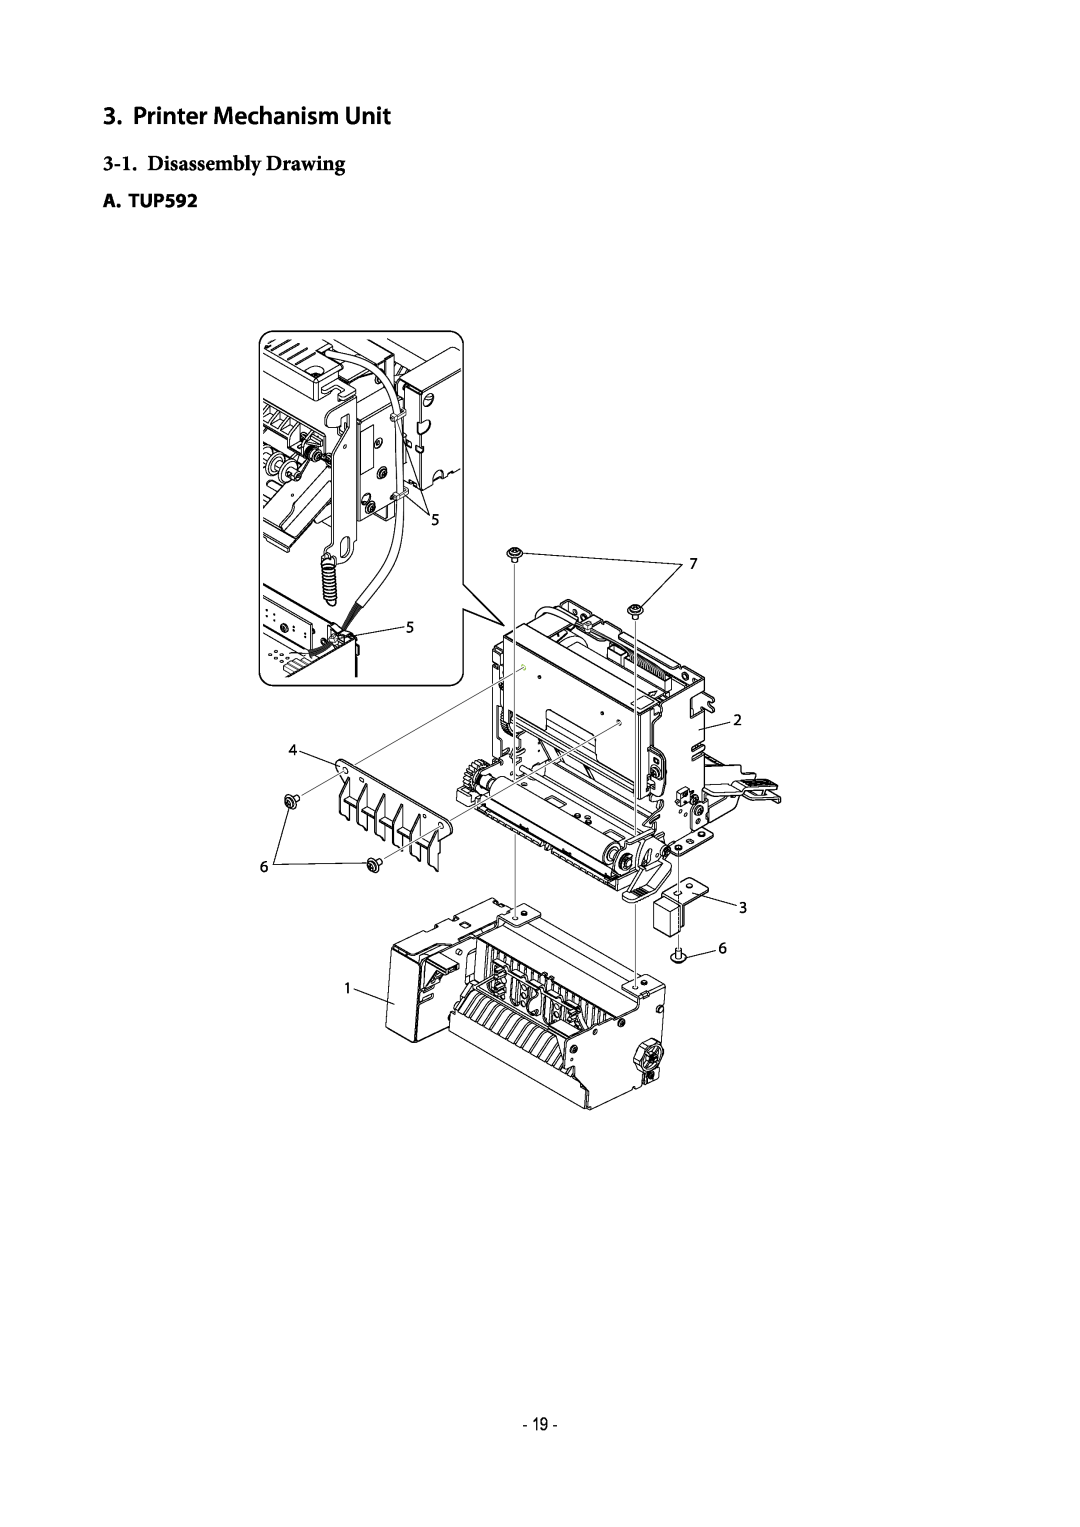 Star Micronics TUP500 technical manual Printer Mechanism Unit, Disassembly Drawing 